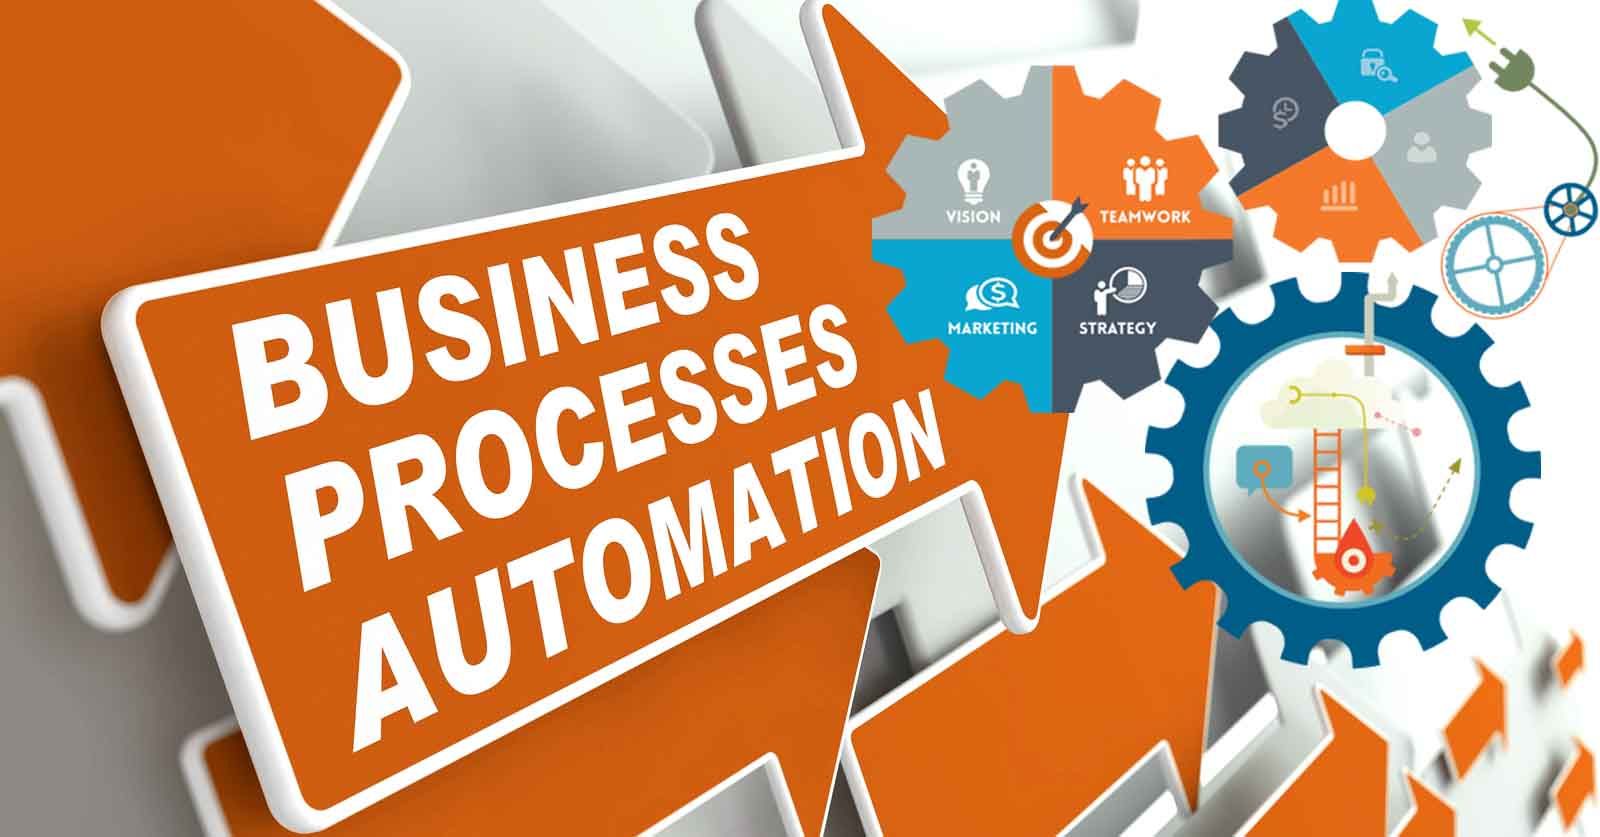 What Is Business Process Automation